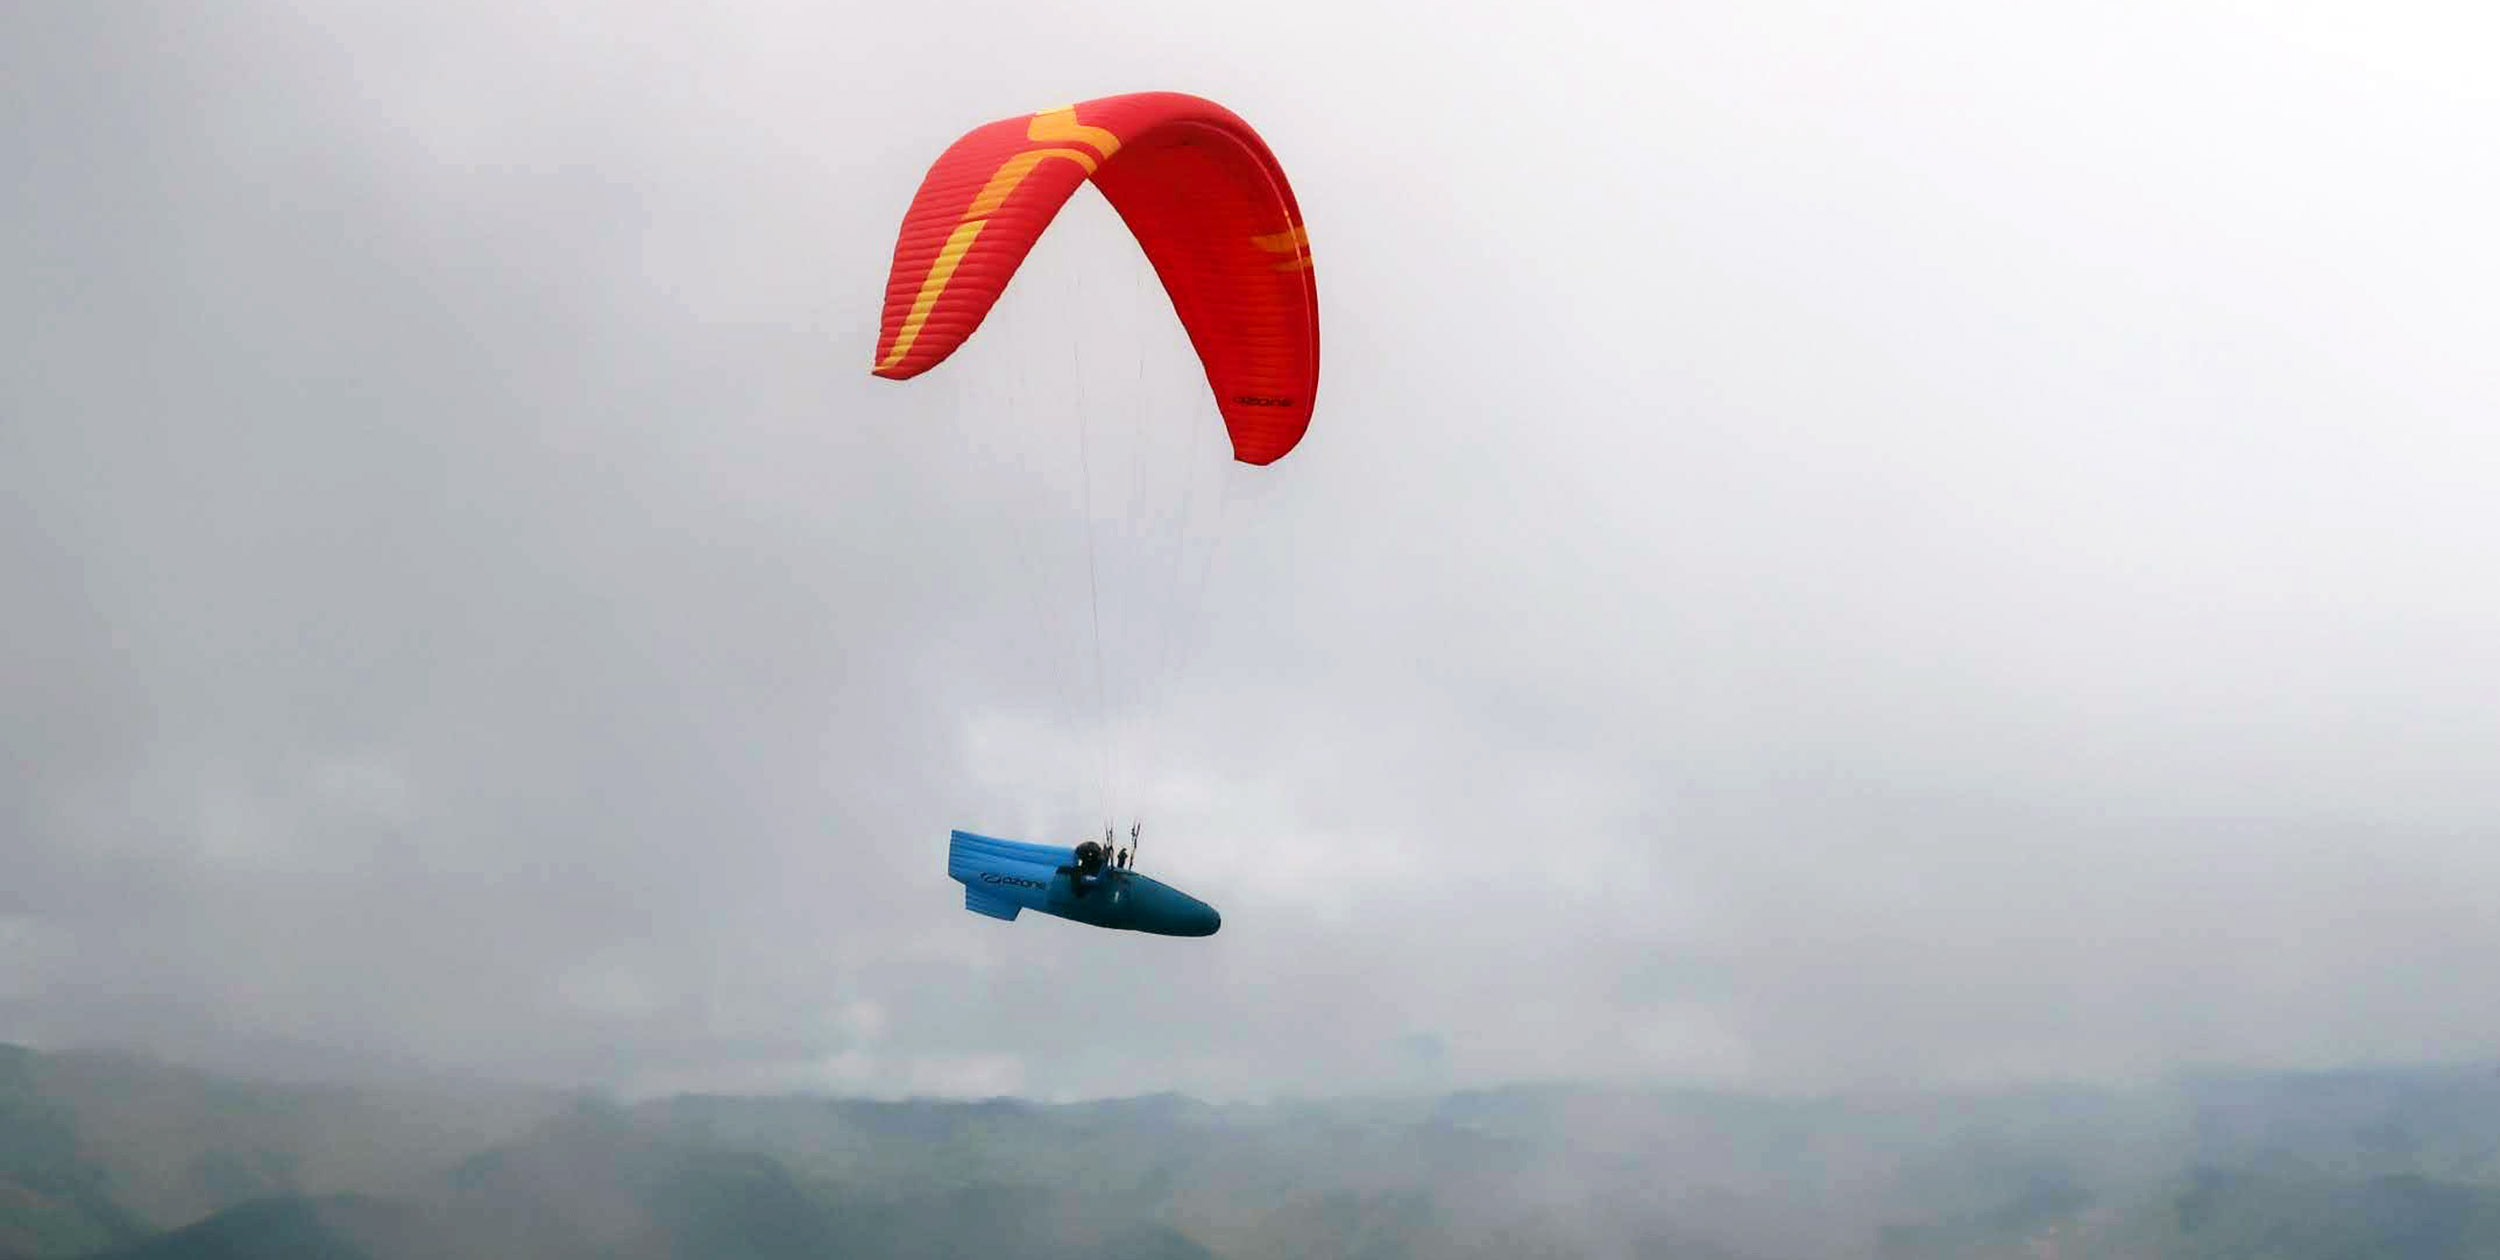 Zeno 2 and Honorin Hamard at the British Paragliding Open in Colombia. Photo: Xavier Laporte